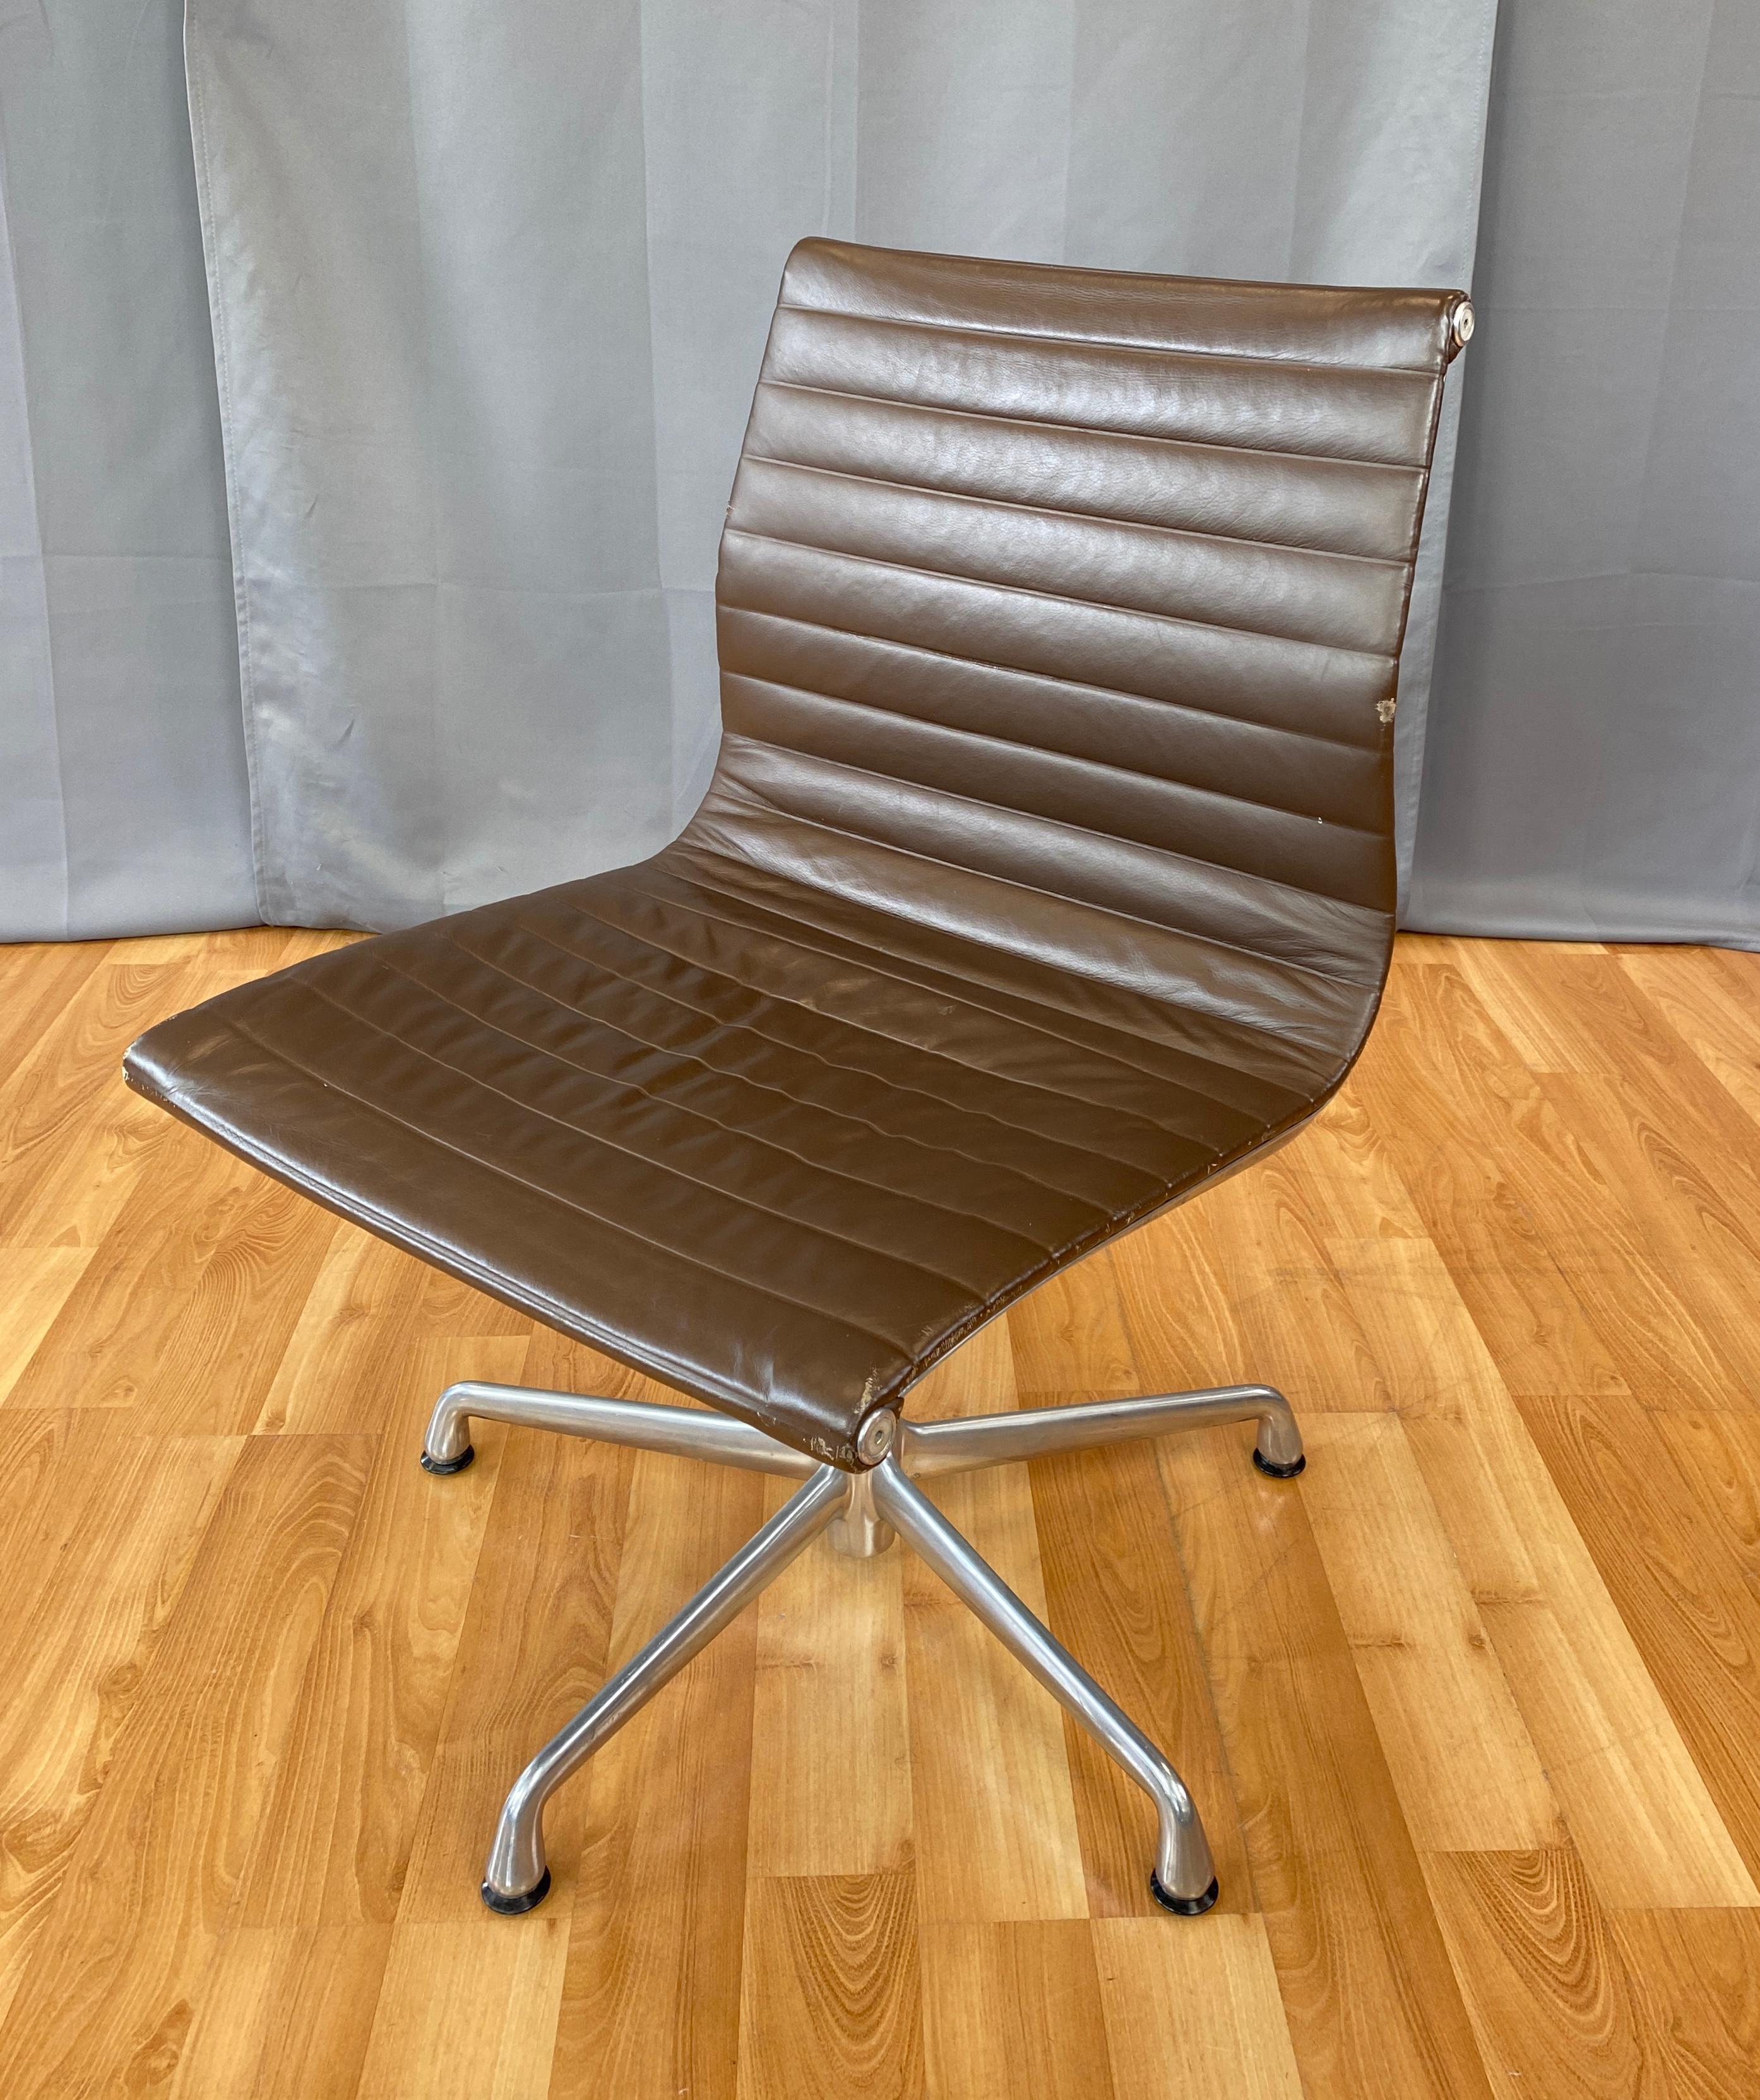 Mid-Century Modern Eames Aluminum Group Side Chair, in Brown Leather 5 Star Base